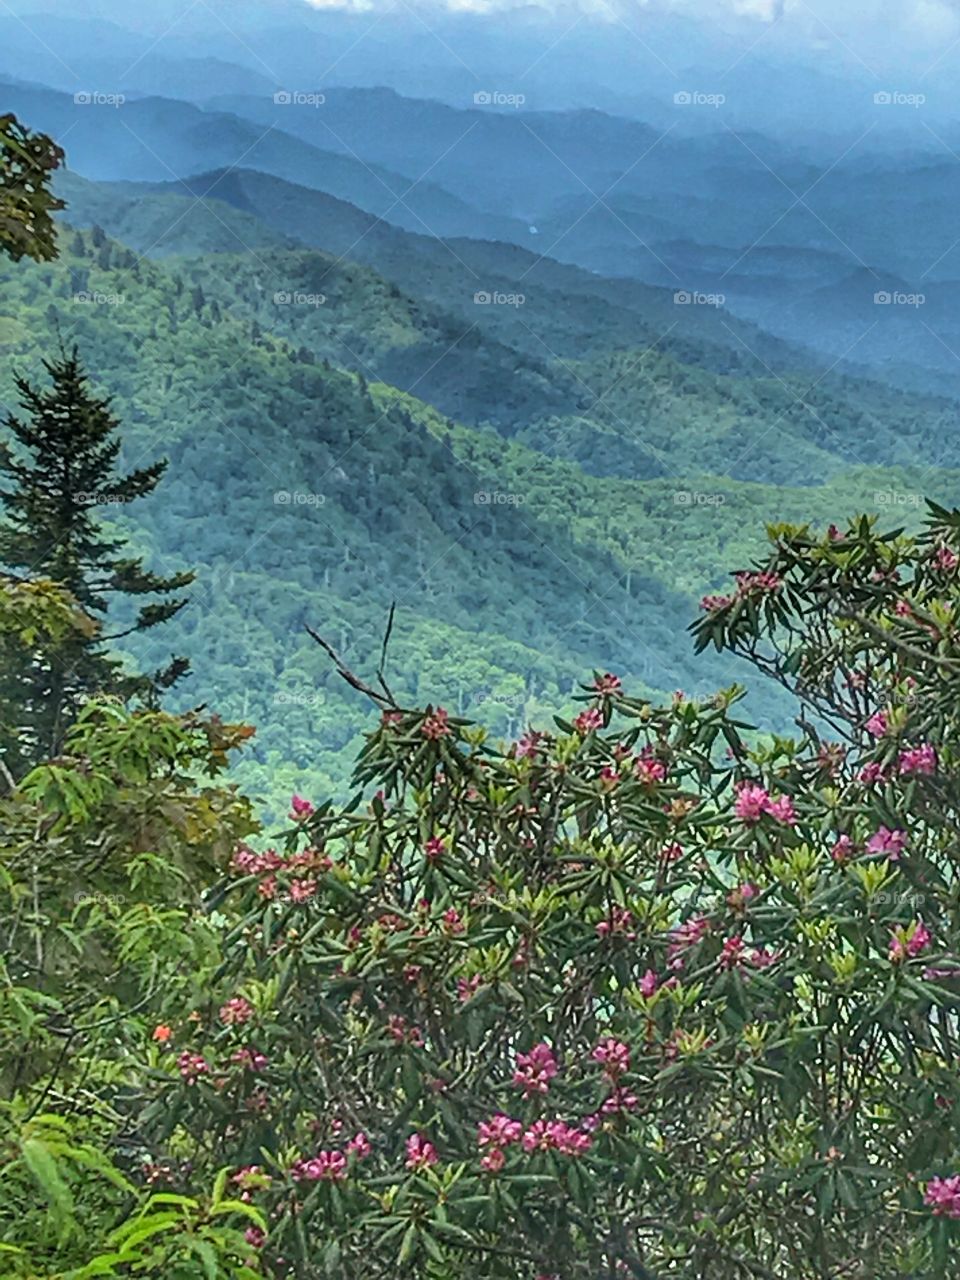 Sights from our drive-Mountain Laurel and the Blue Ridge Mountains